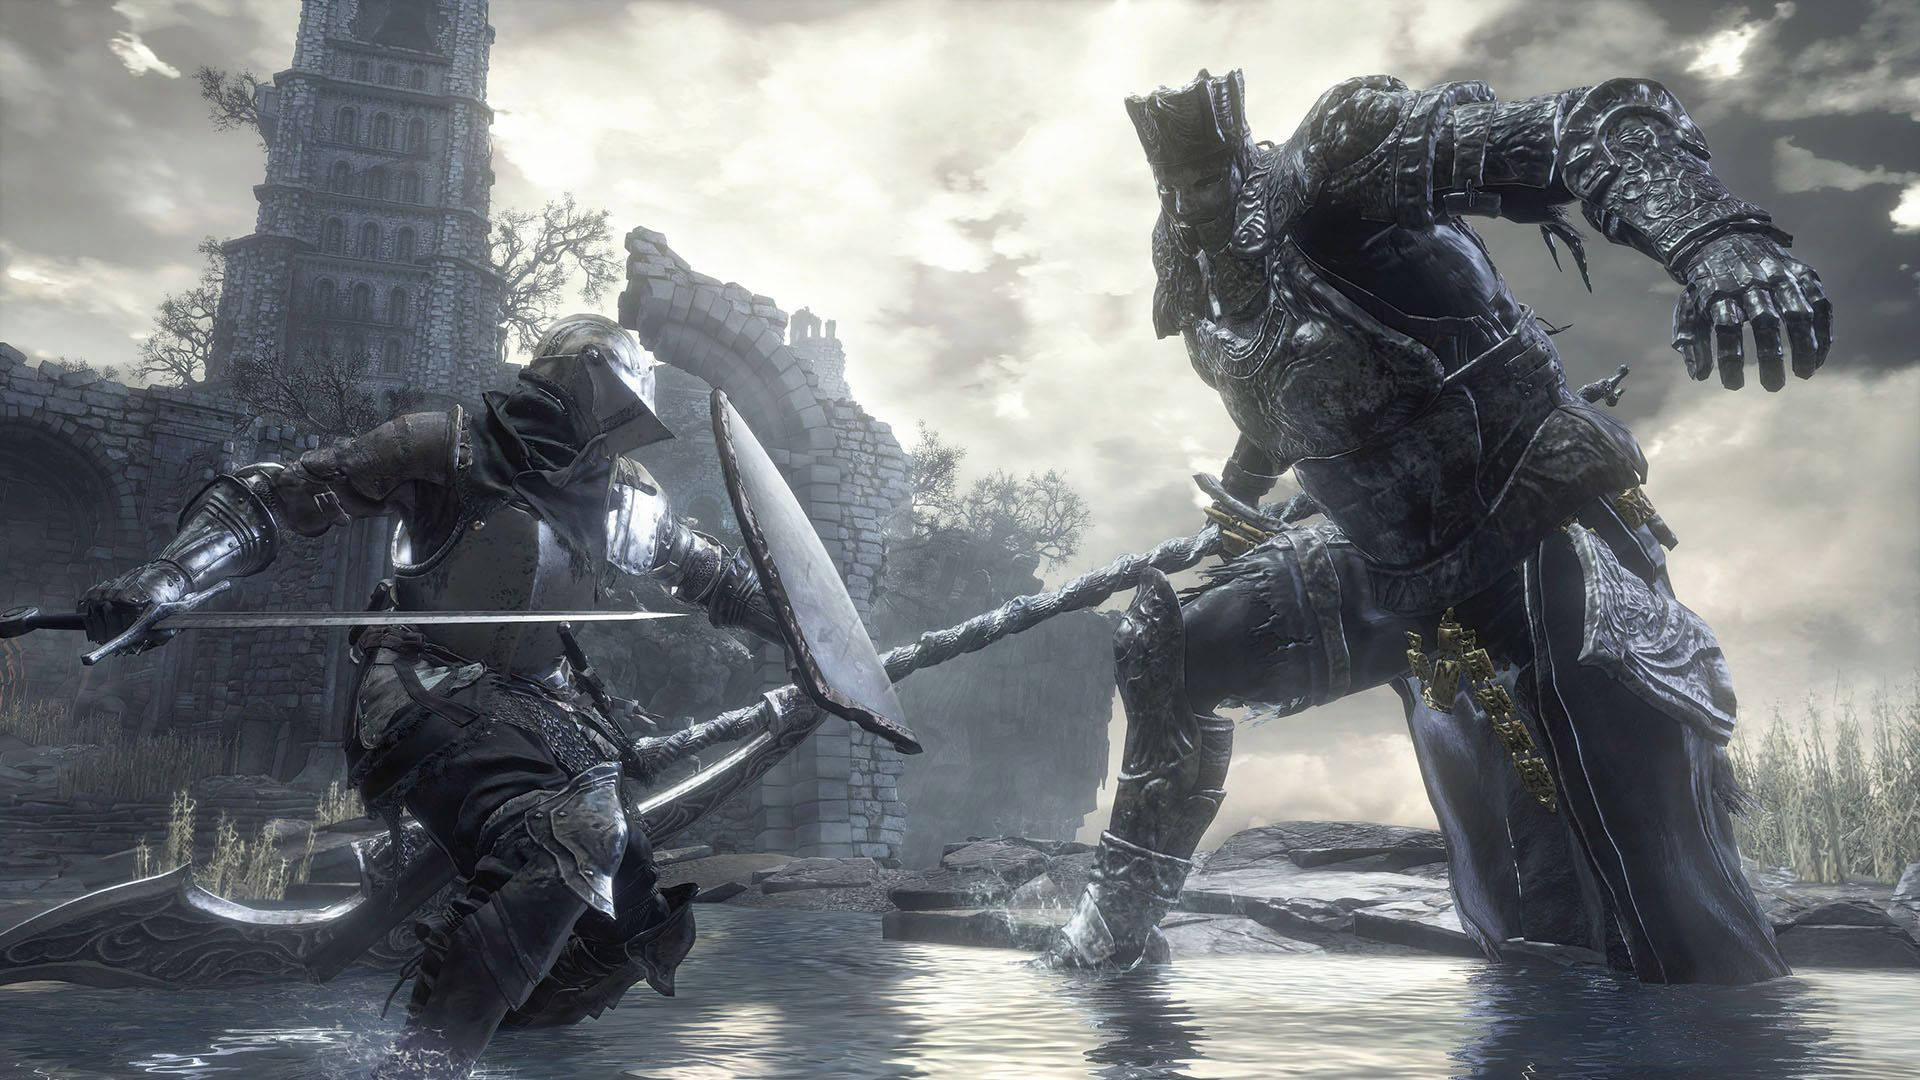 "The Ashen One takes on Iudex Gundyr in a battle for Souls in Dark Souls 3" Wallpaper